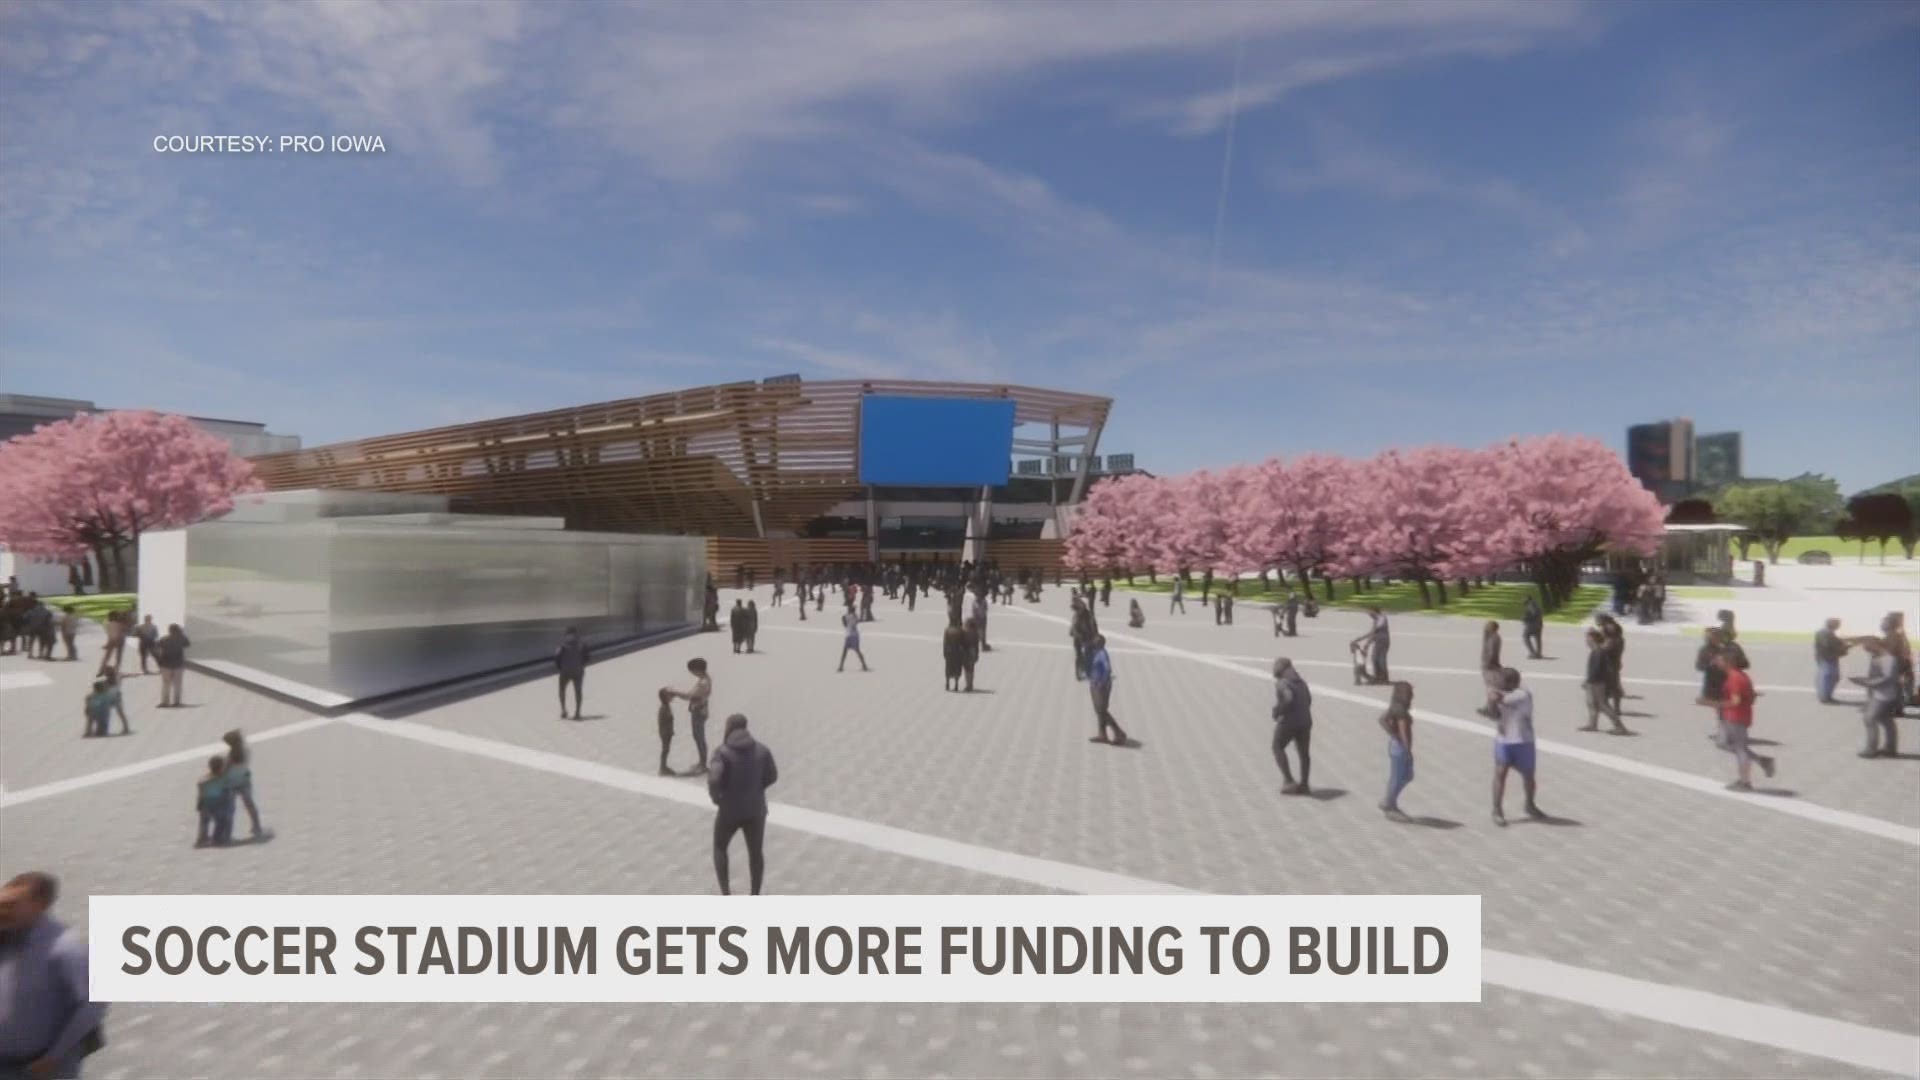 Millions of dollars coming for soccer stadium and Merle Hay Campus Reinvestment.